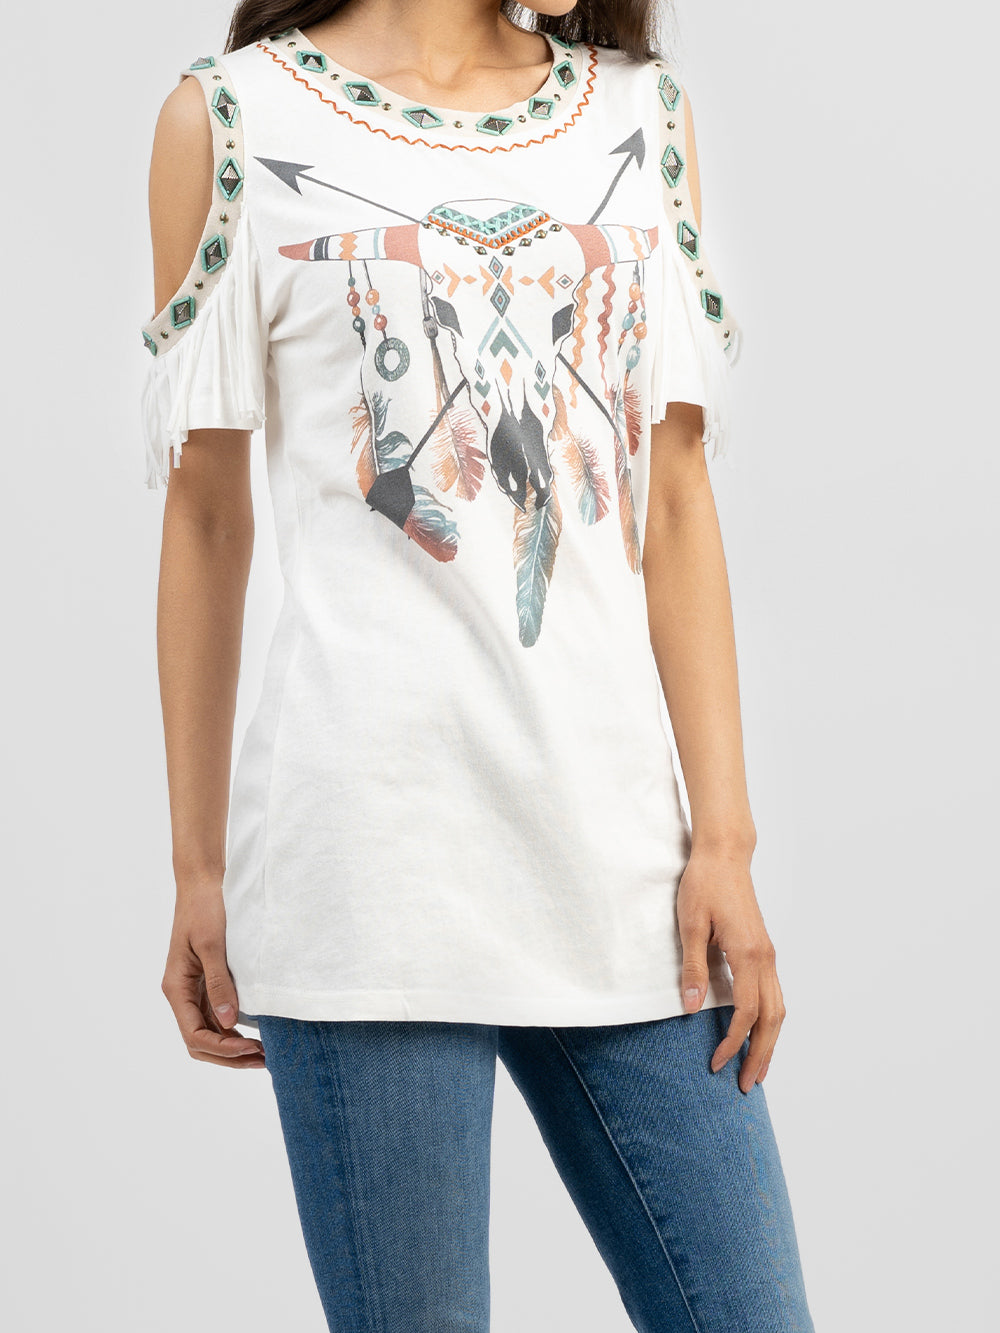 Women's Mineral Wash Bull Aztec Graphic Short Sleeve Tee - Cowgirl Wear